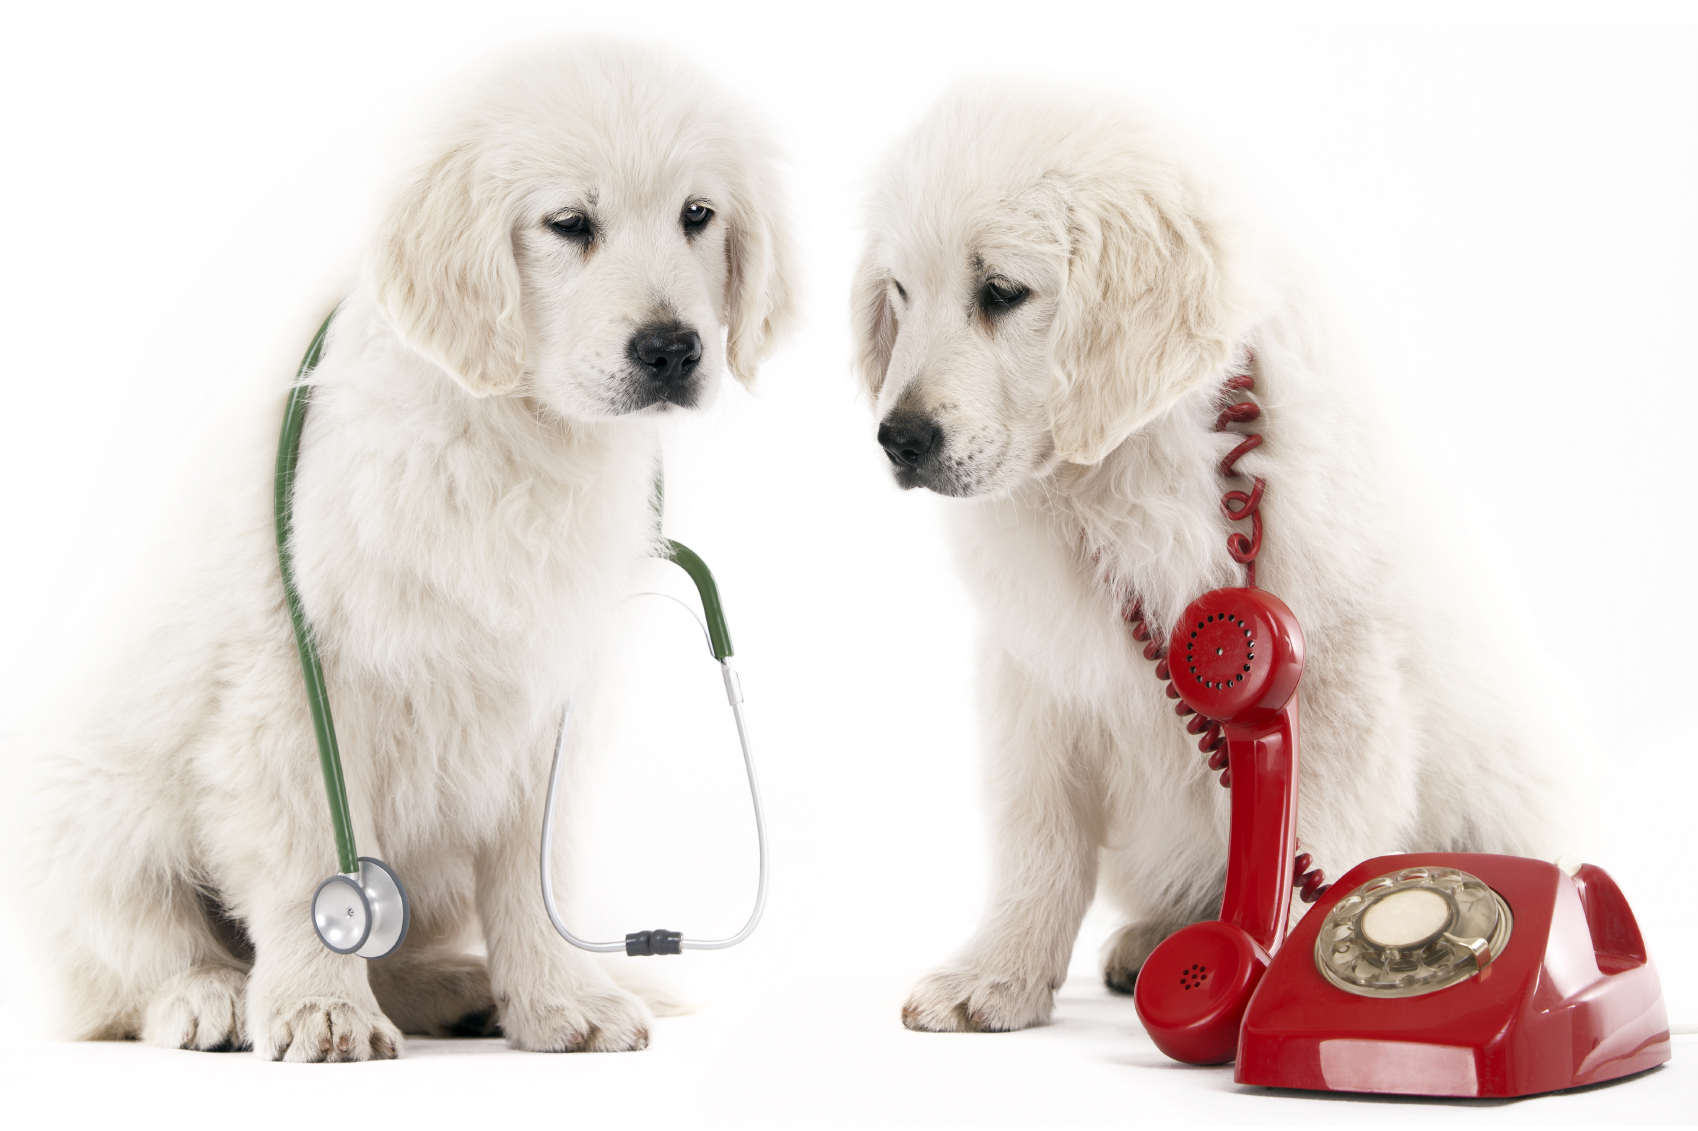 2 golden retriever puppy with a red phone and a stethoscope